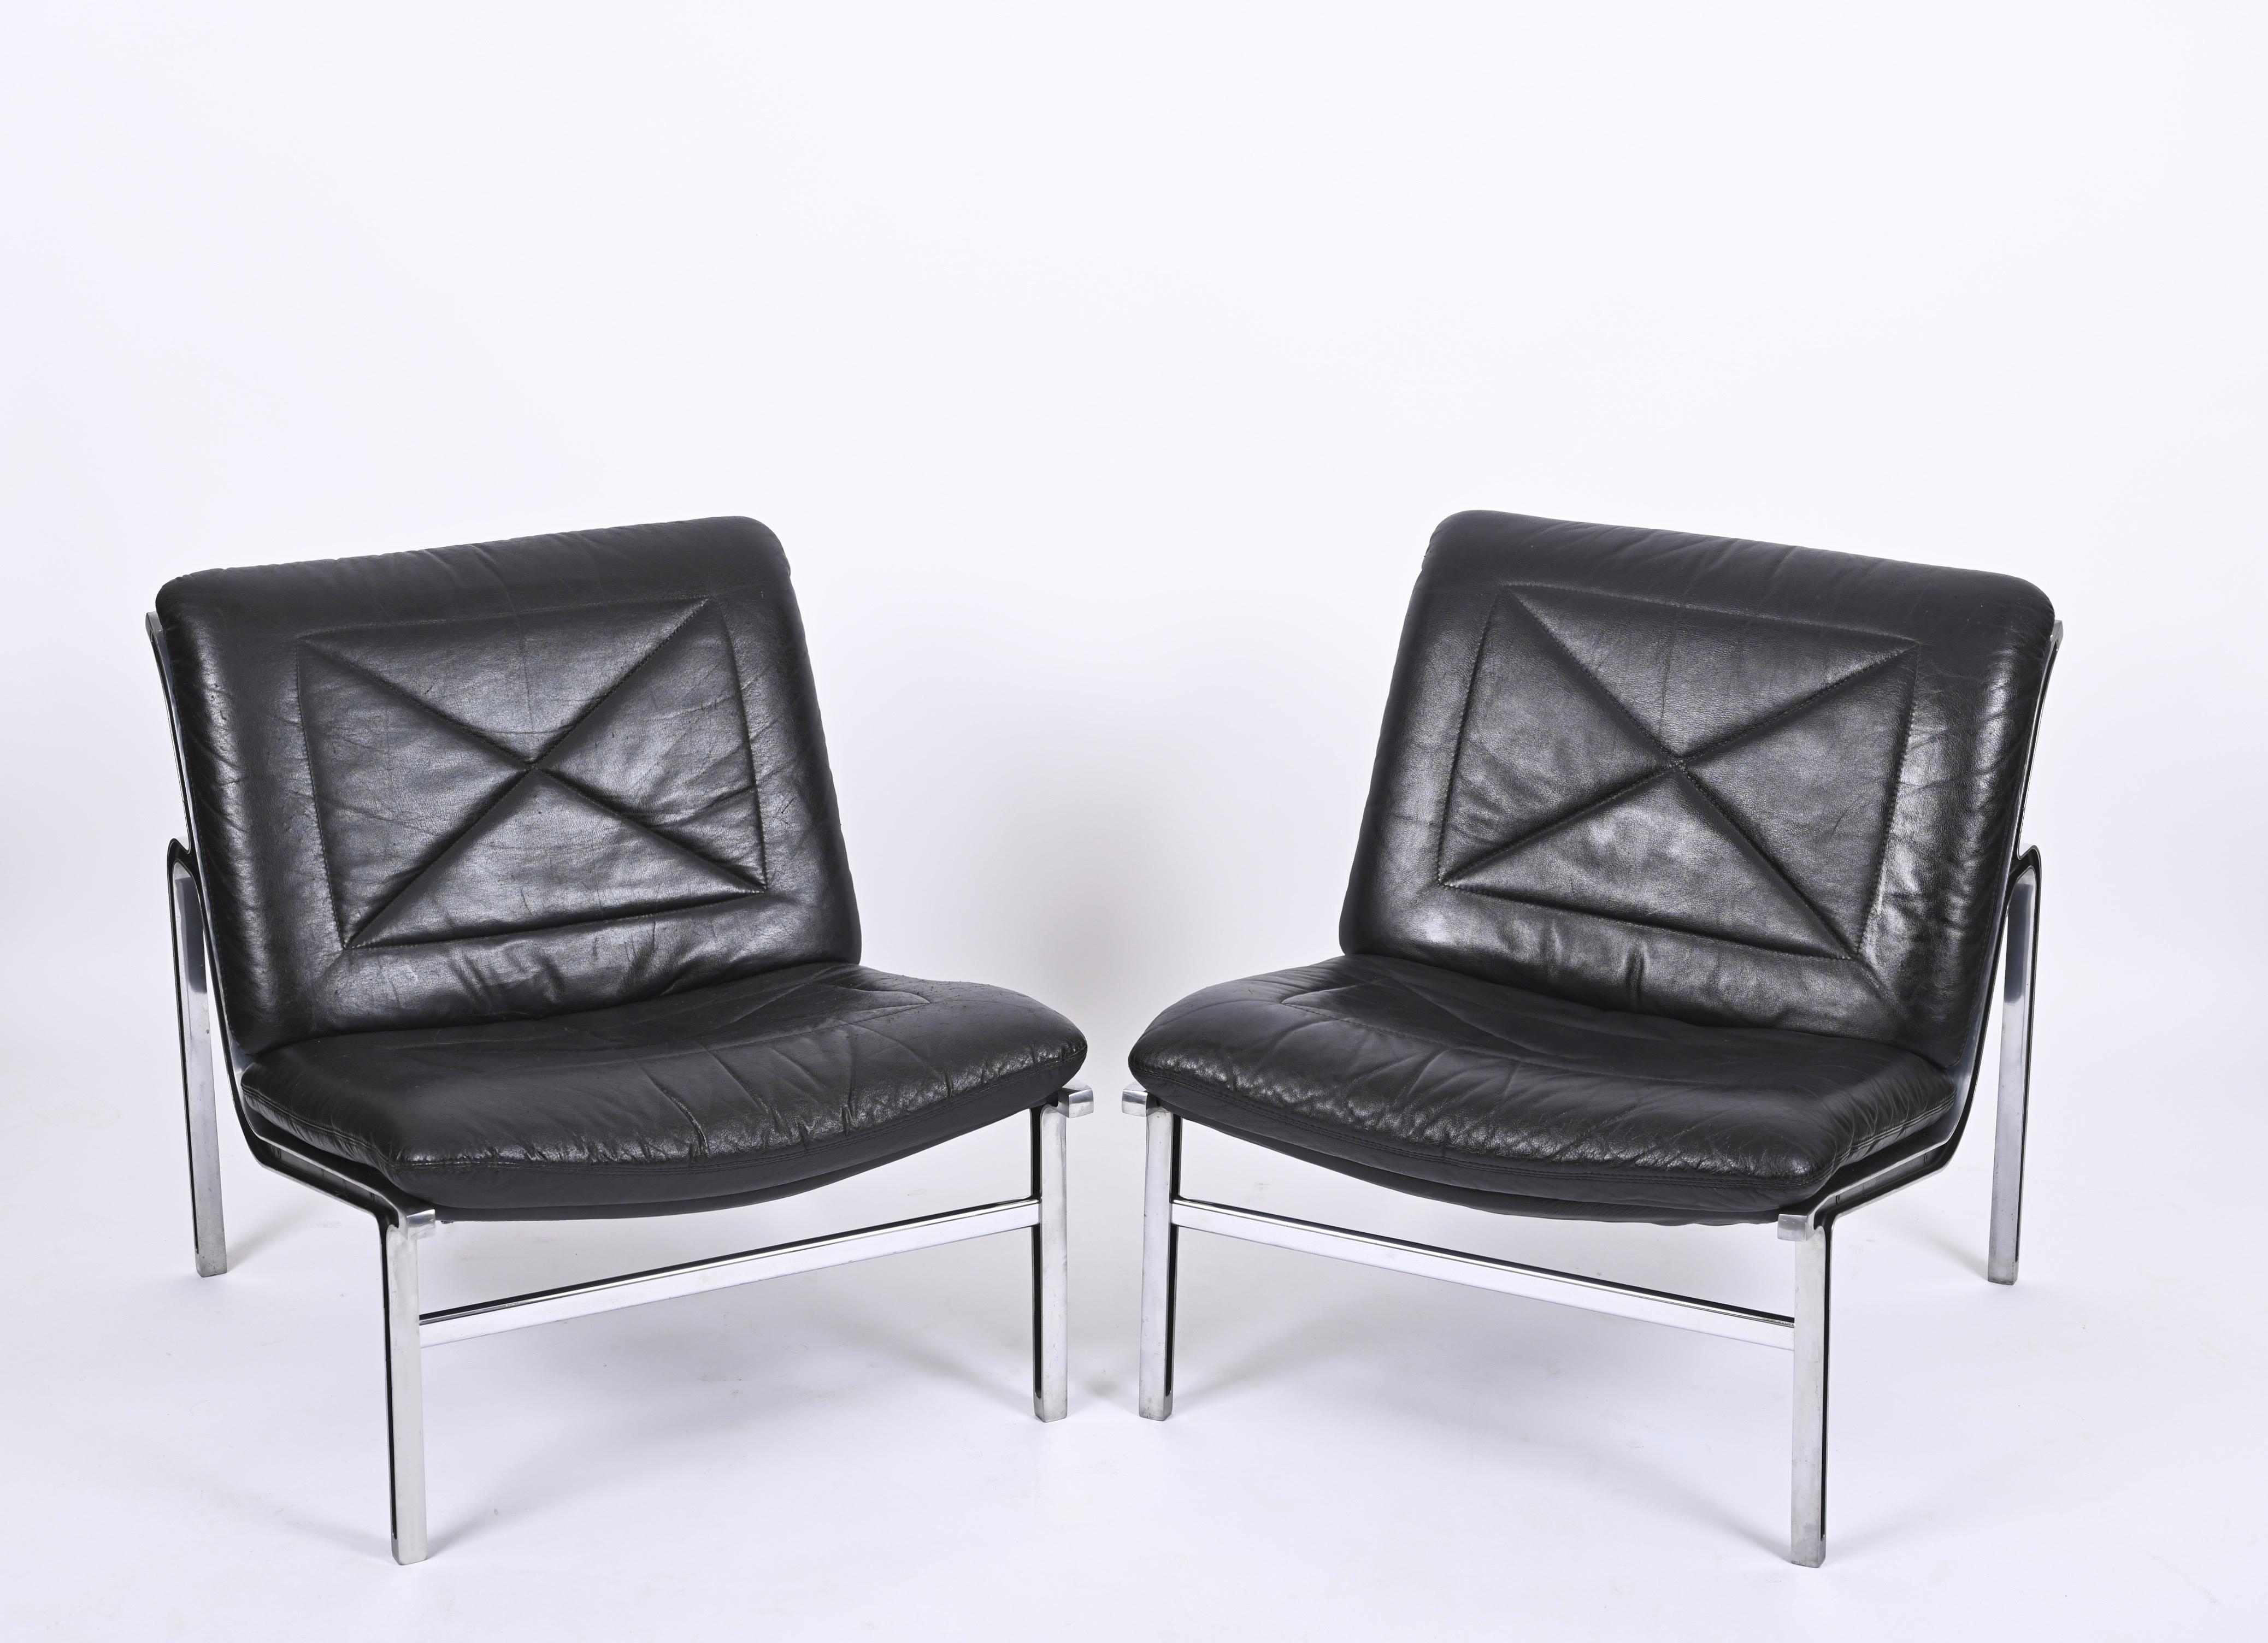 Andre Vandenbeuck Pair of 'Aluline' Lounge Chairs in Black Leather, Swiss, 1960s For Sale 10